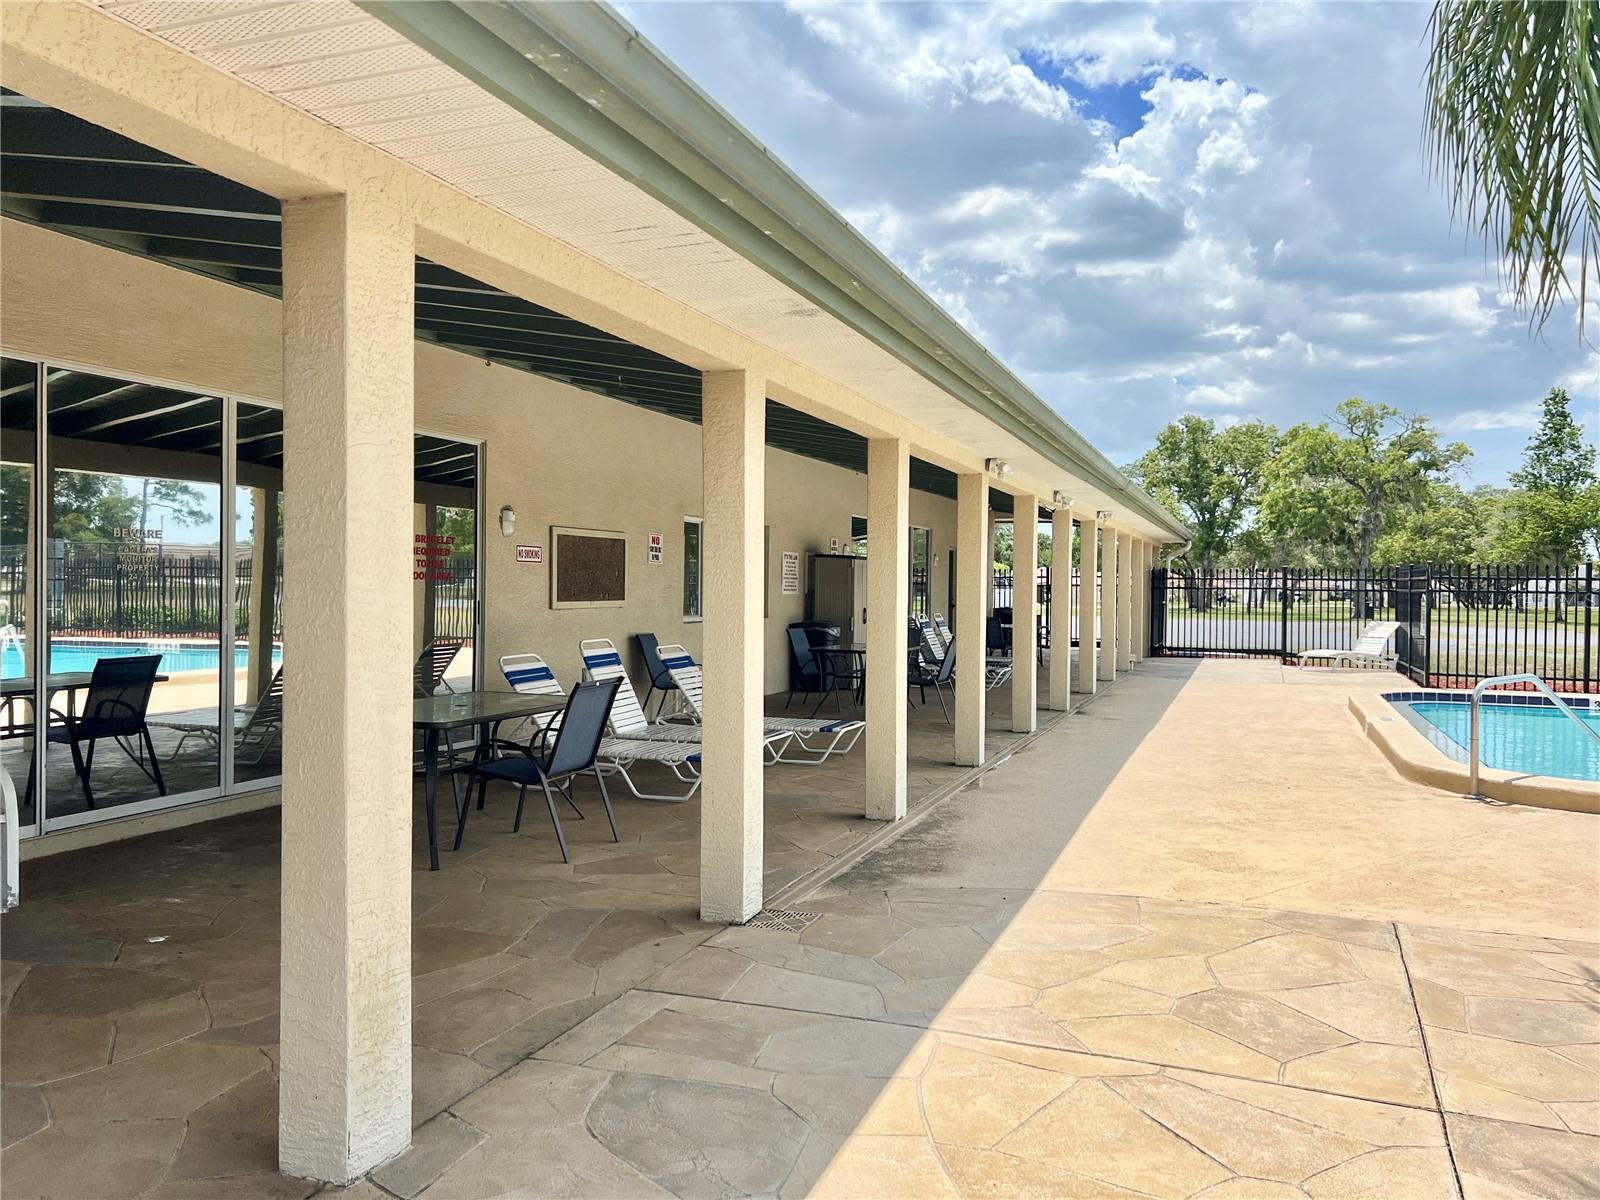 Community Pool and Covered Patio